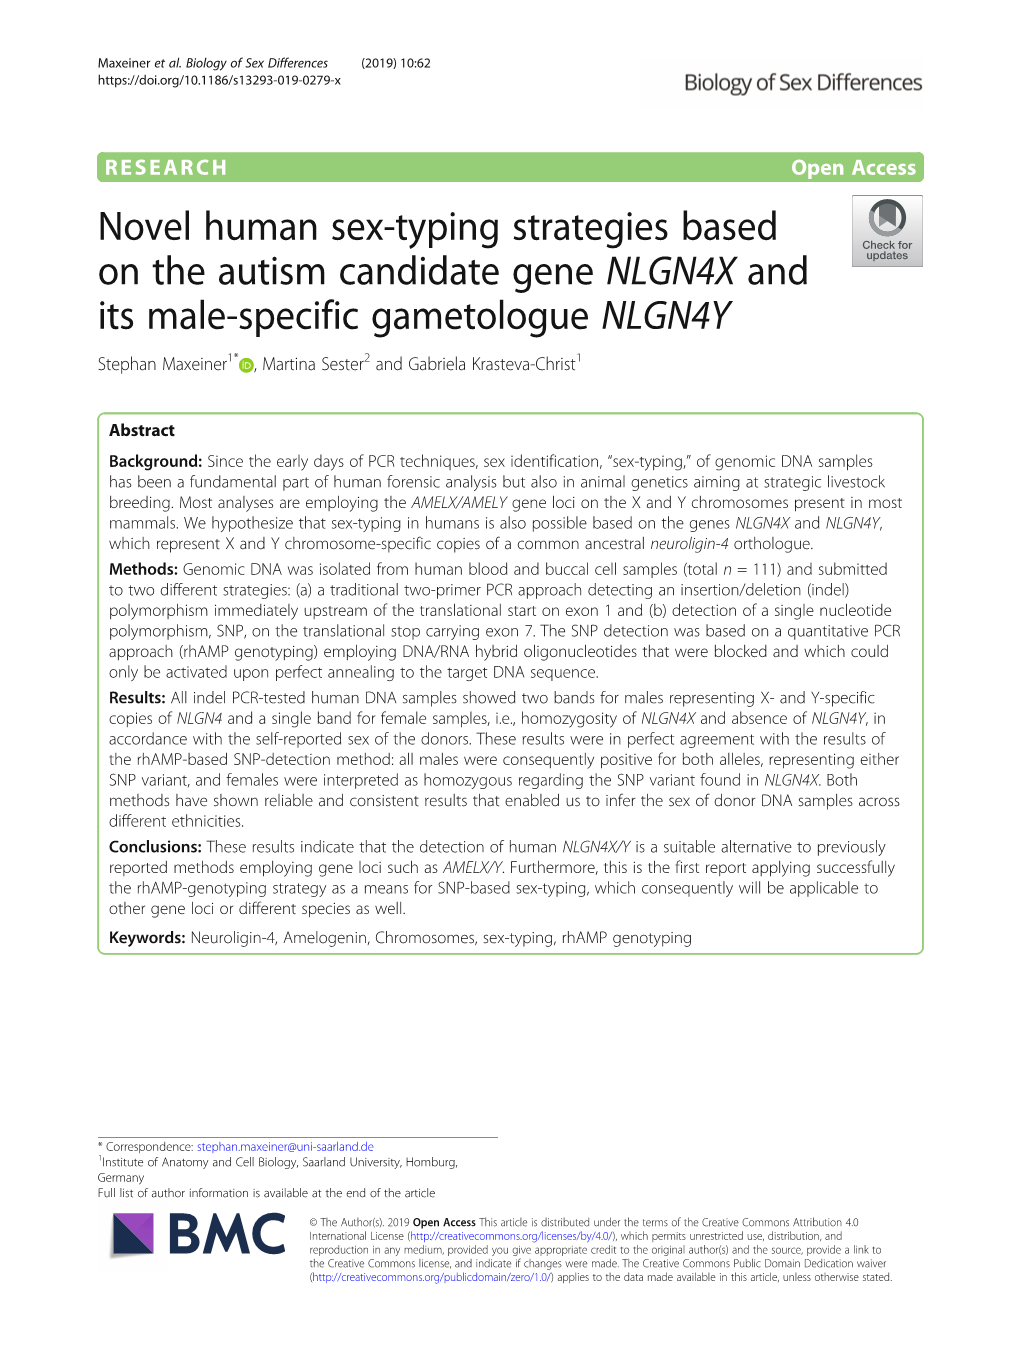 Novel Human Sex-Typing Strategies Based on the Autism Candidate